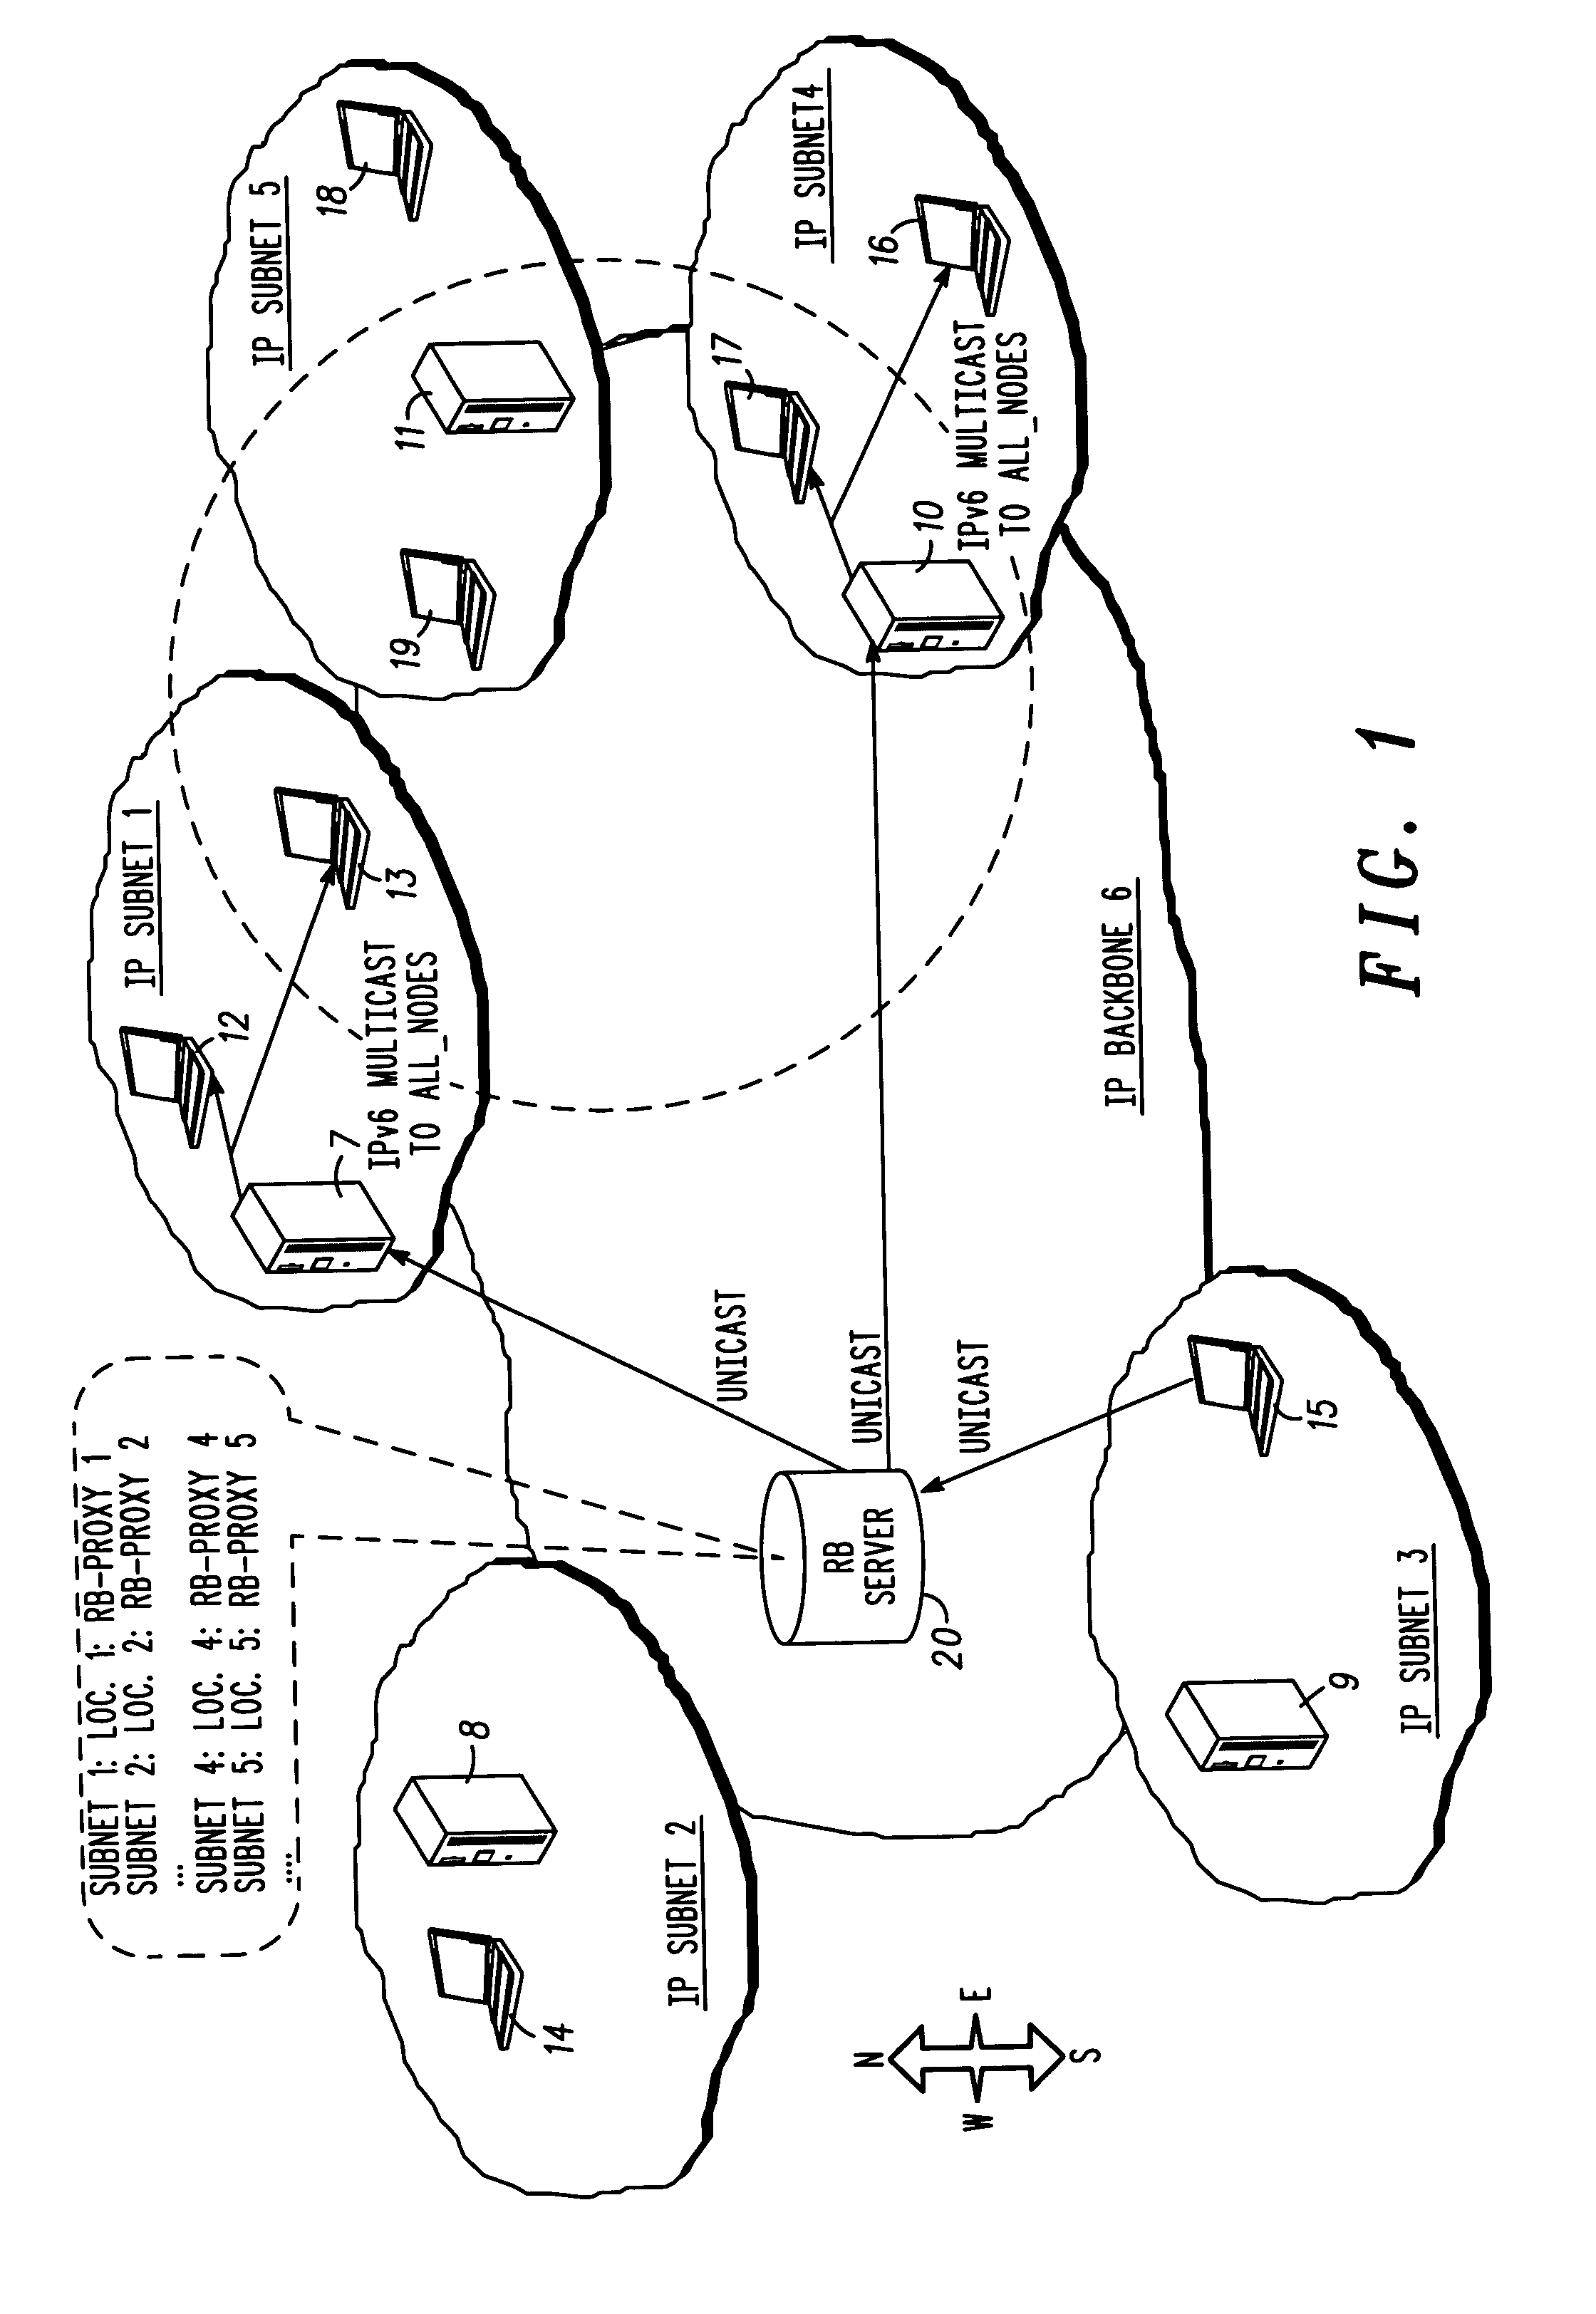 Communication over selected part of a network